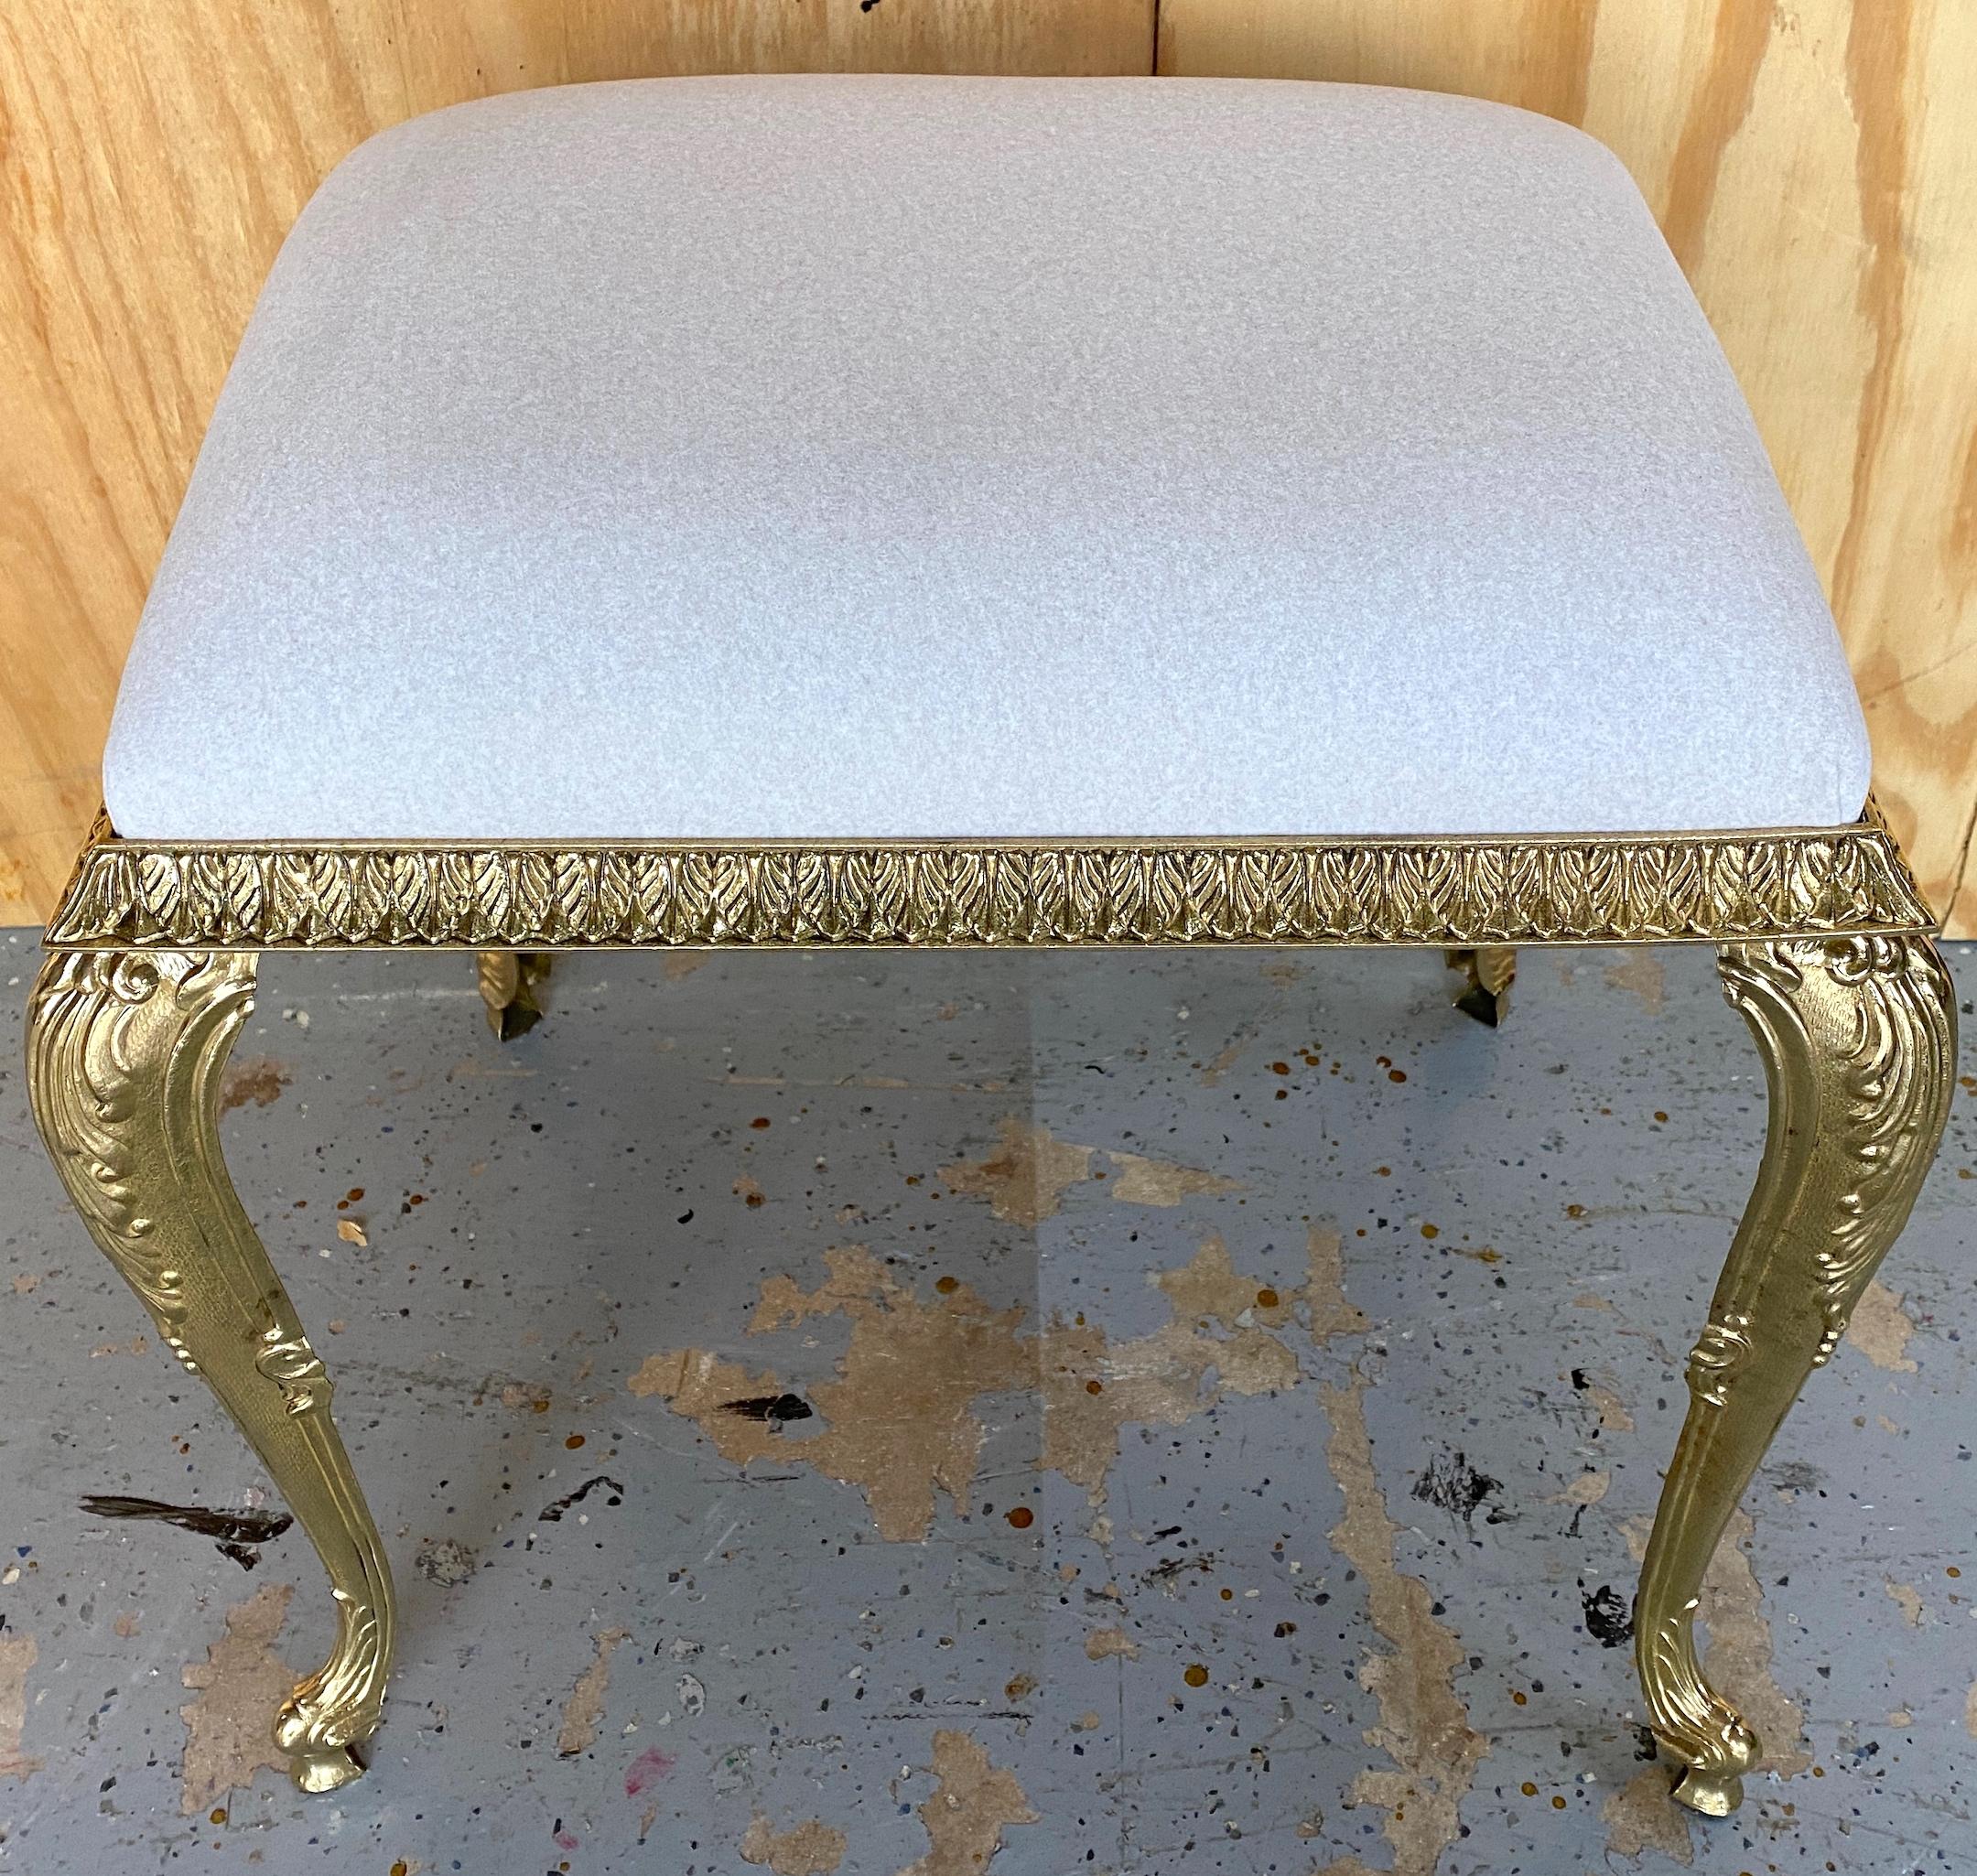 Pair of French Neoclassical Bronze Benches /Ottomans Kravet Cashmere Upholstery  In Good Condition For Sale In West Palm Beach, FL